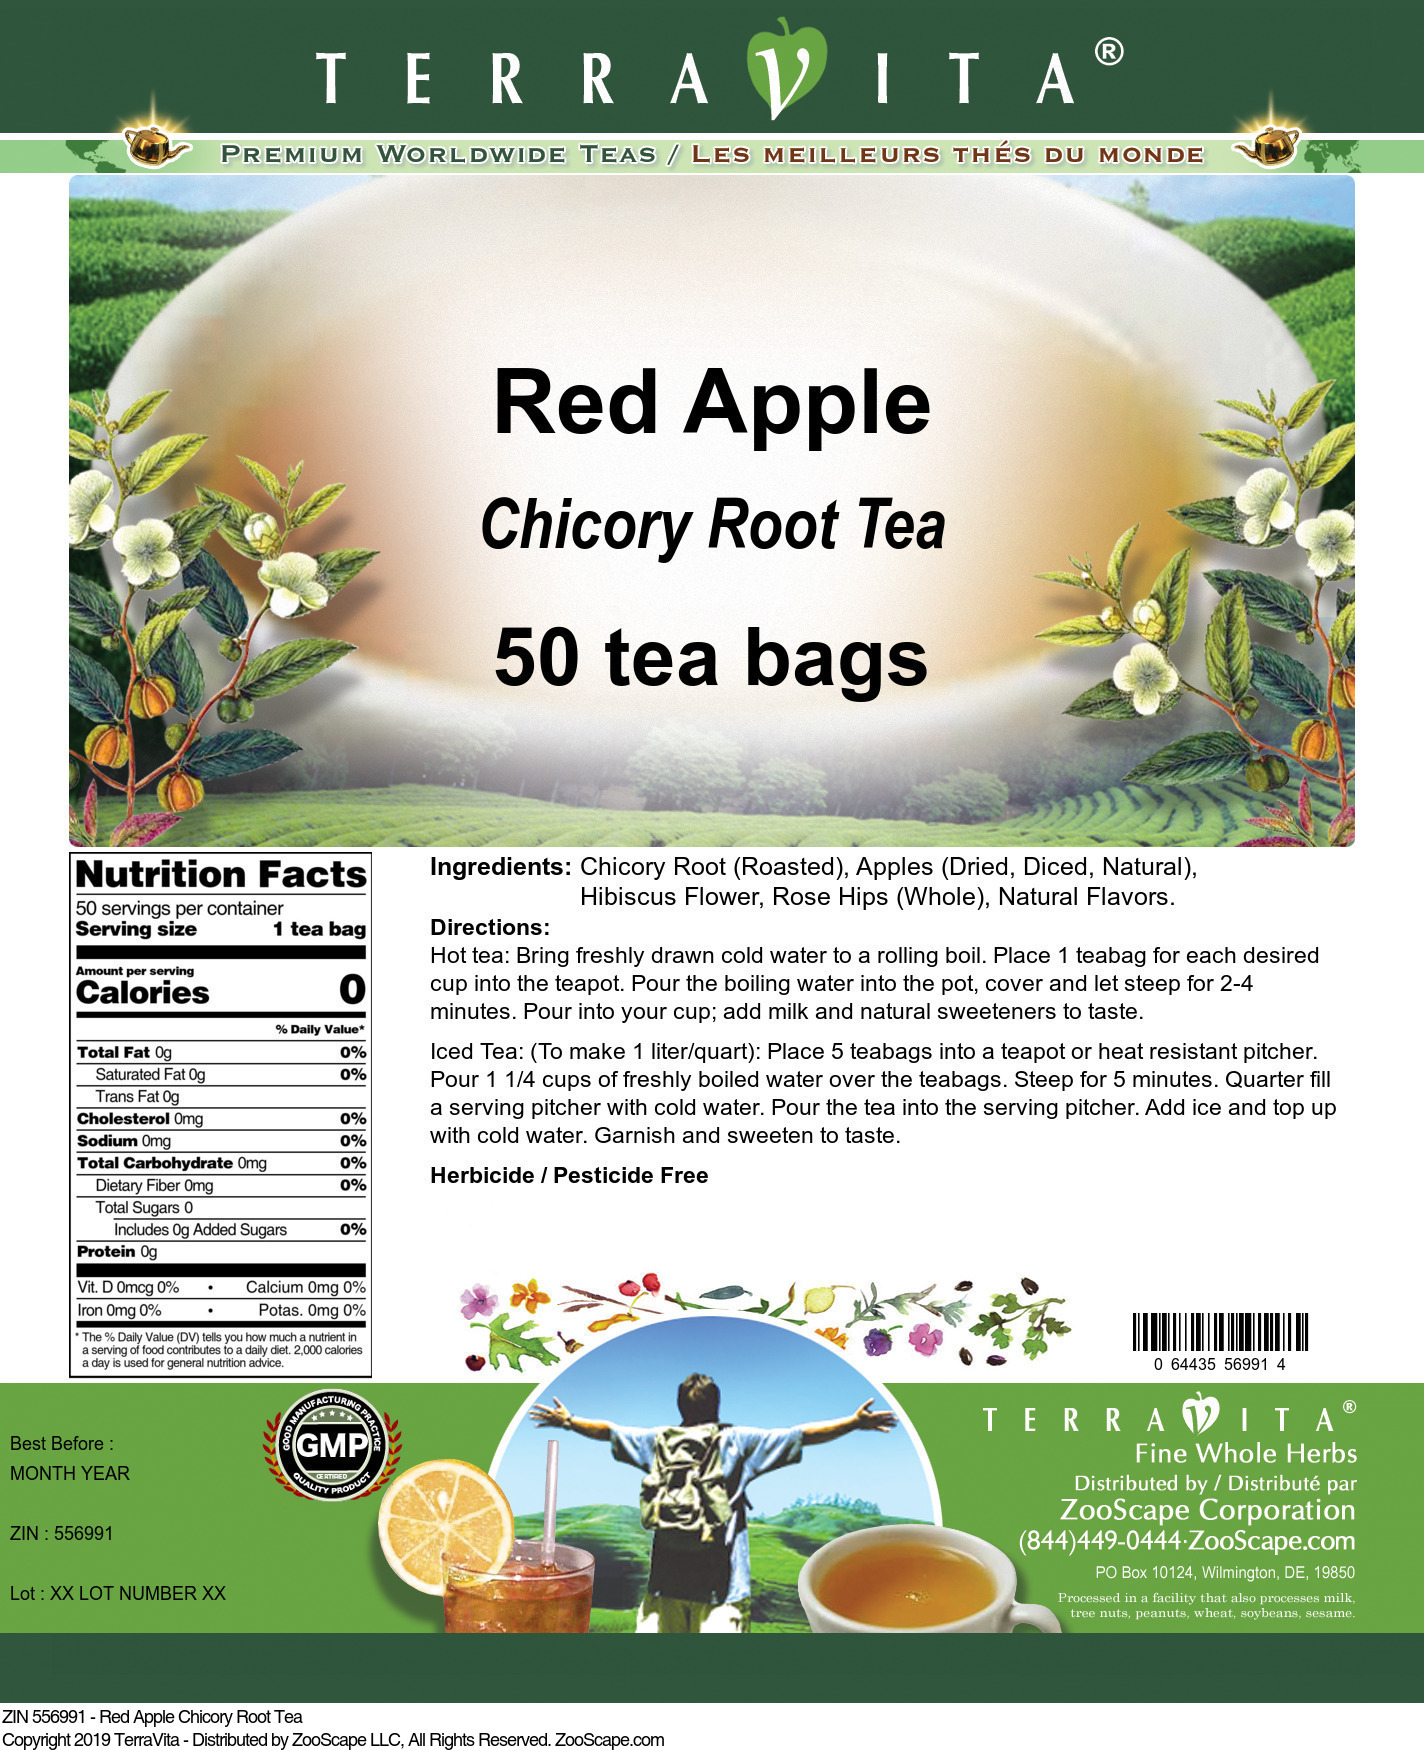 Red Apple Chicory Root Tea - Label